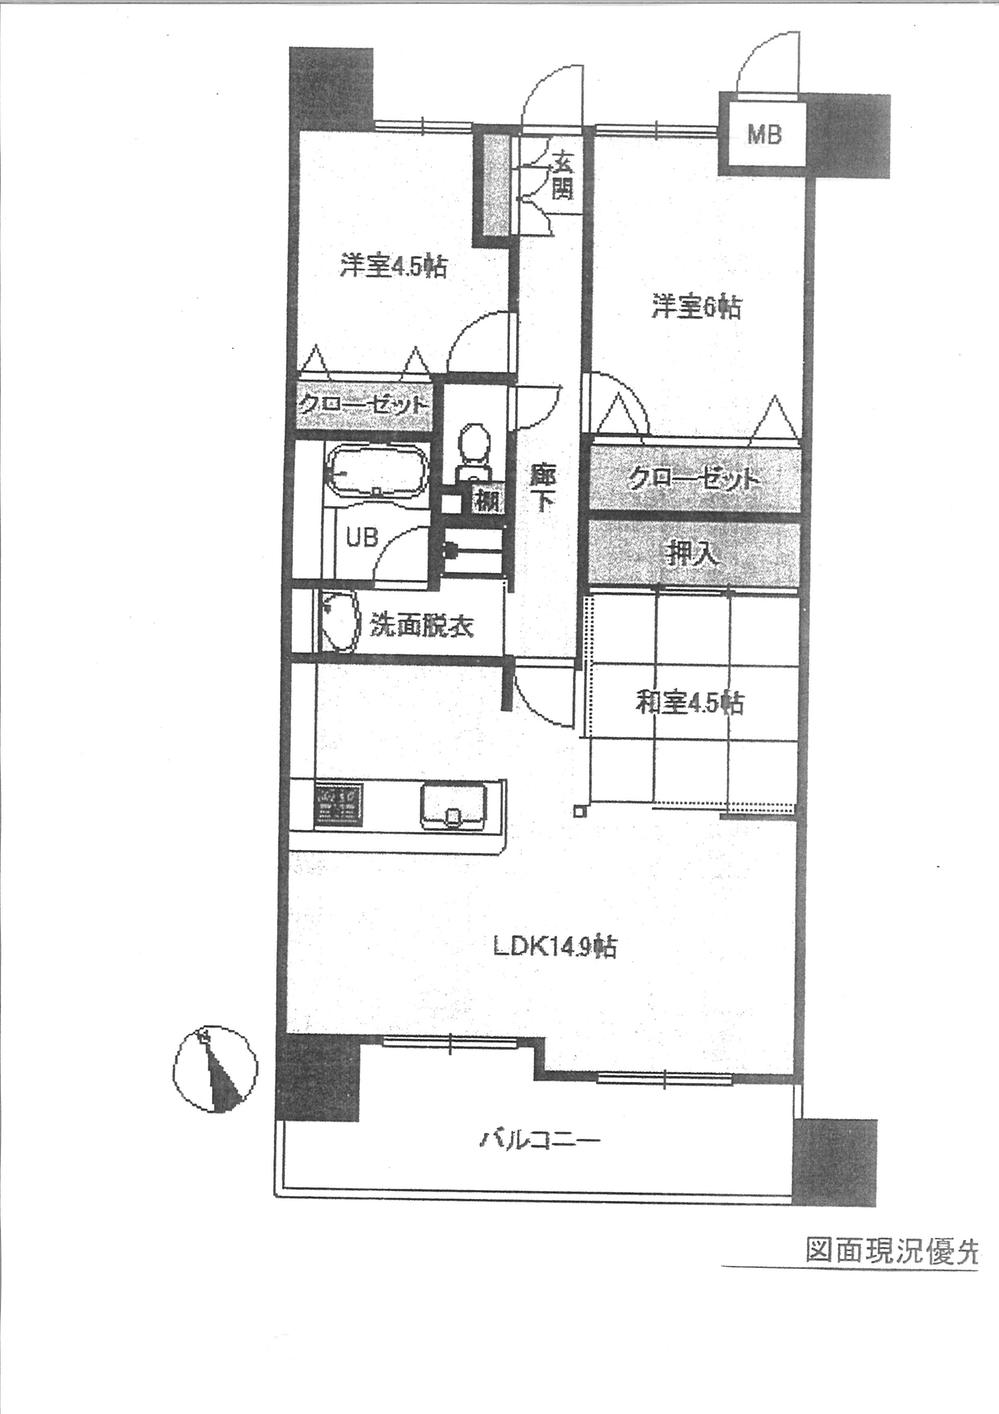 Floor plan. 3LDK, Price 18.4 million yen, Bright living in the occupied area 64.89 sq m south-facing balcony